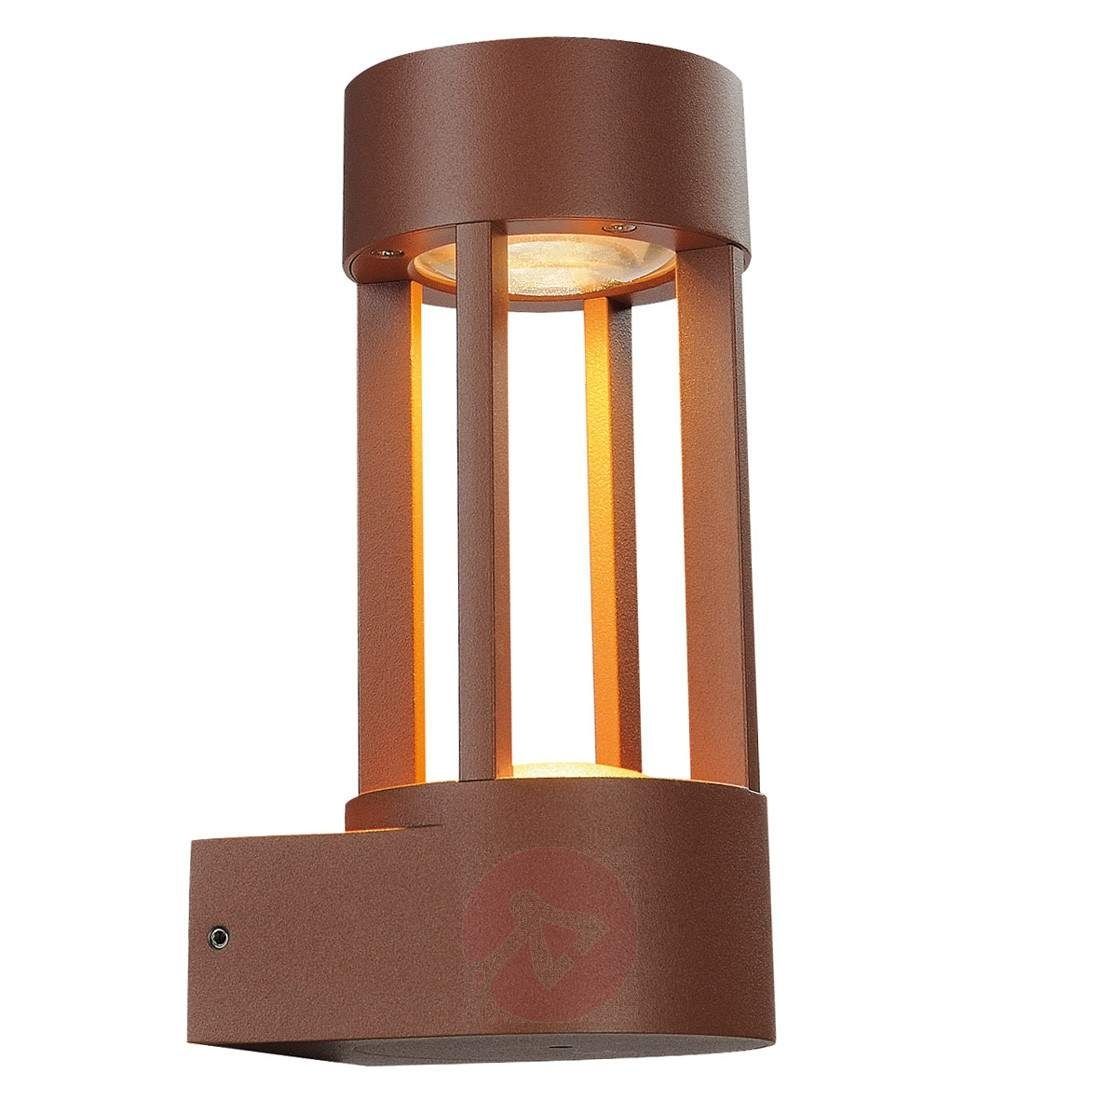 Striking Slots Wall Led Outdoor Wall Light, Rust | Lights.co (View 11 of 15)